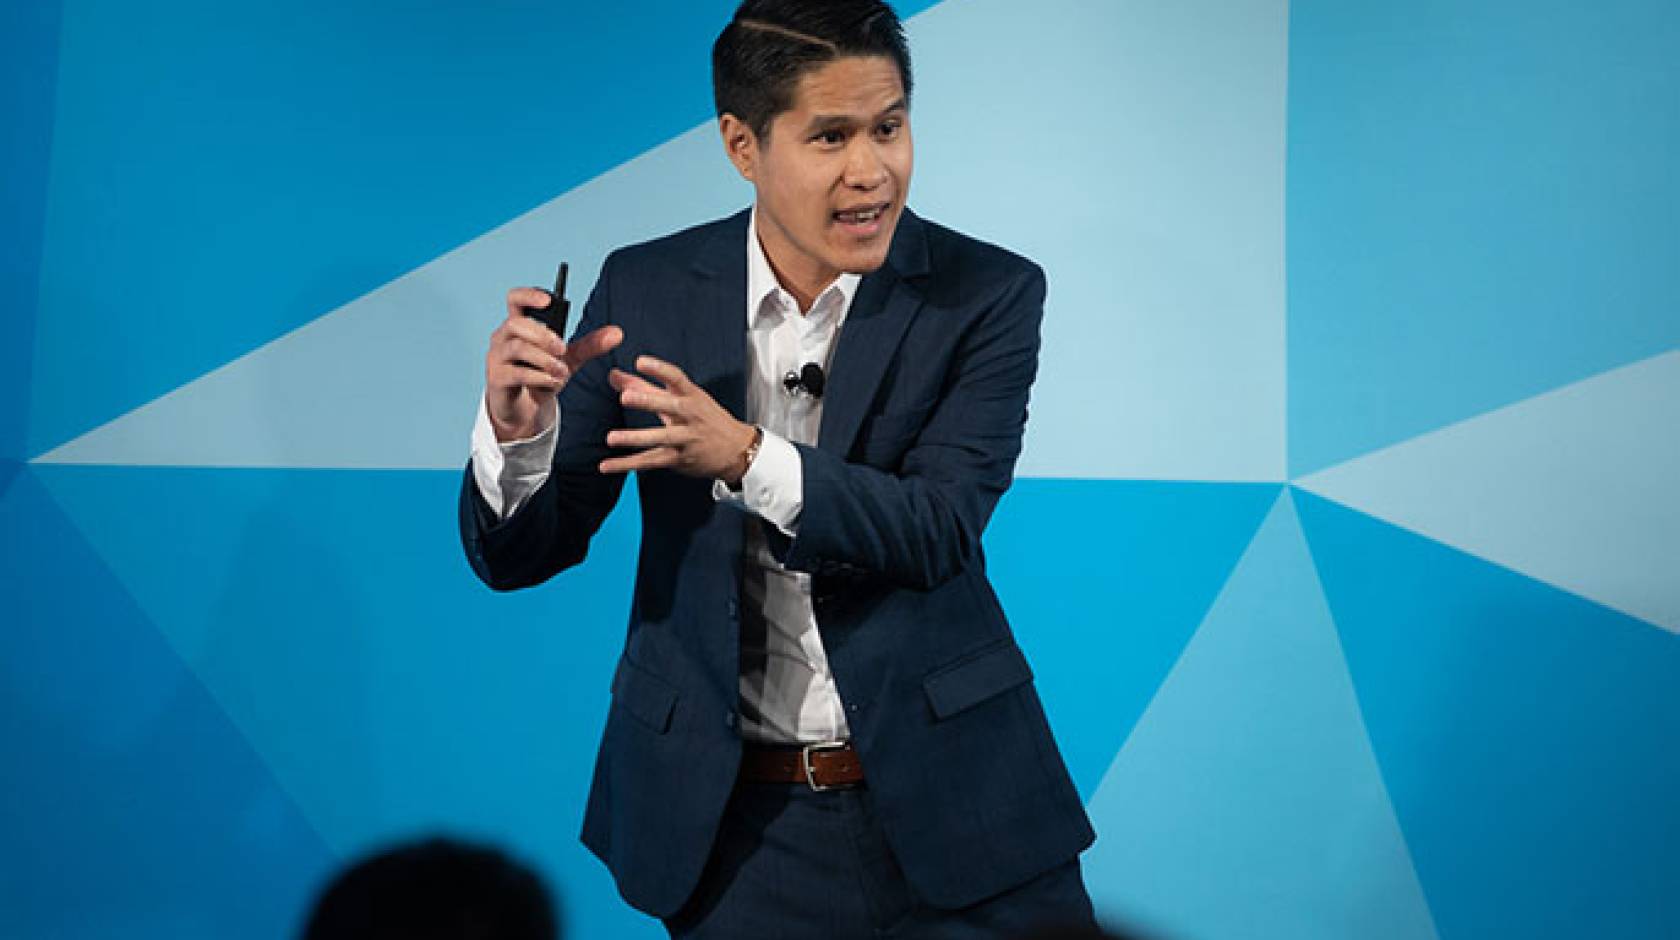 Image shows person speaking on a stage